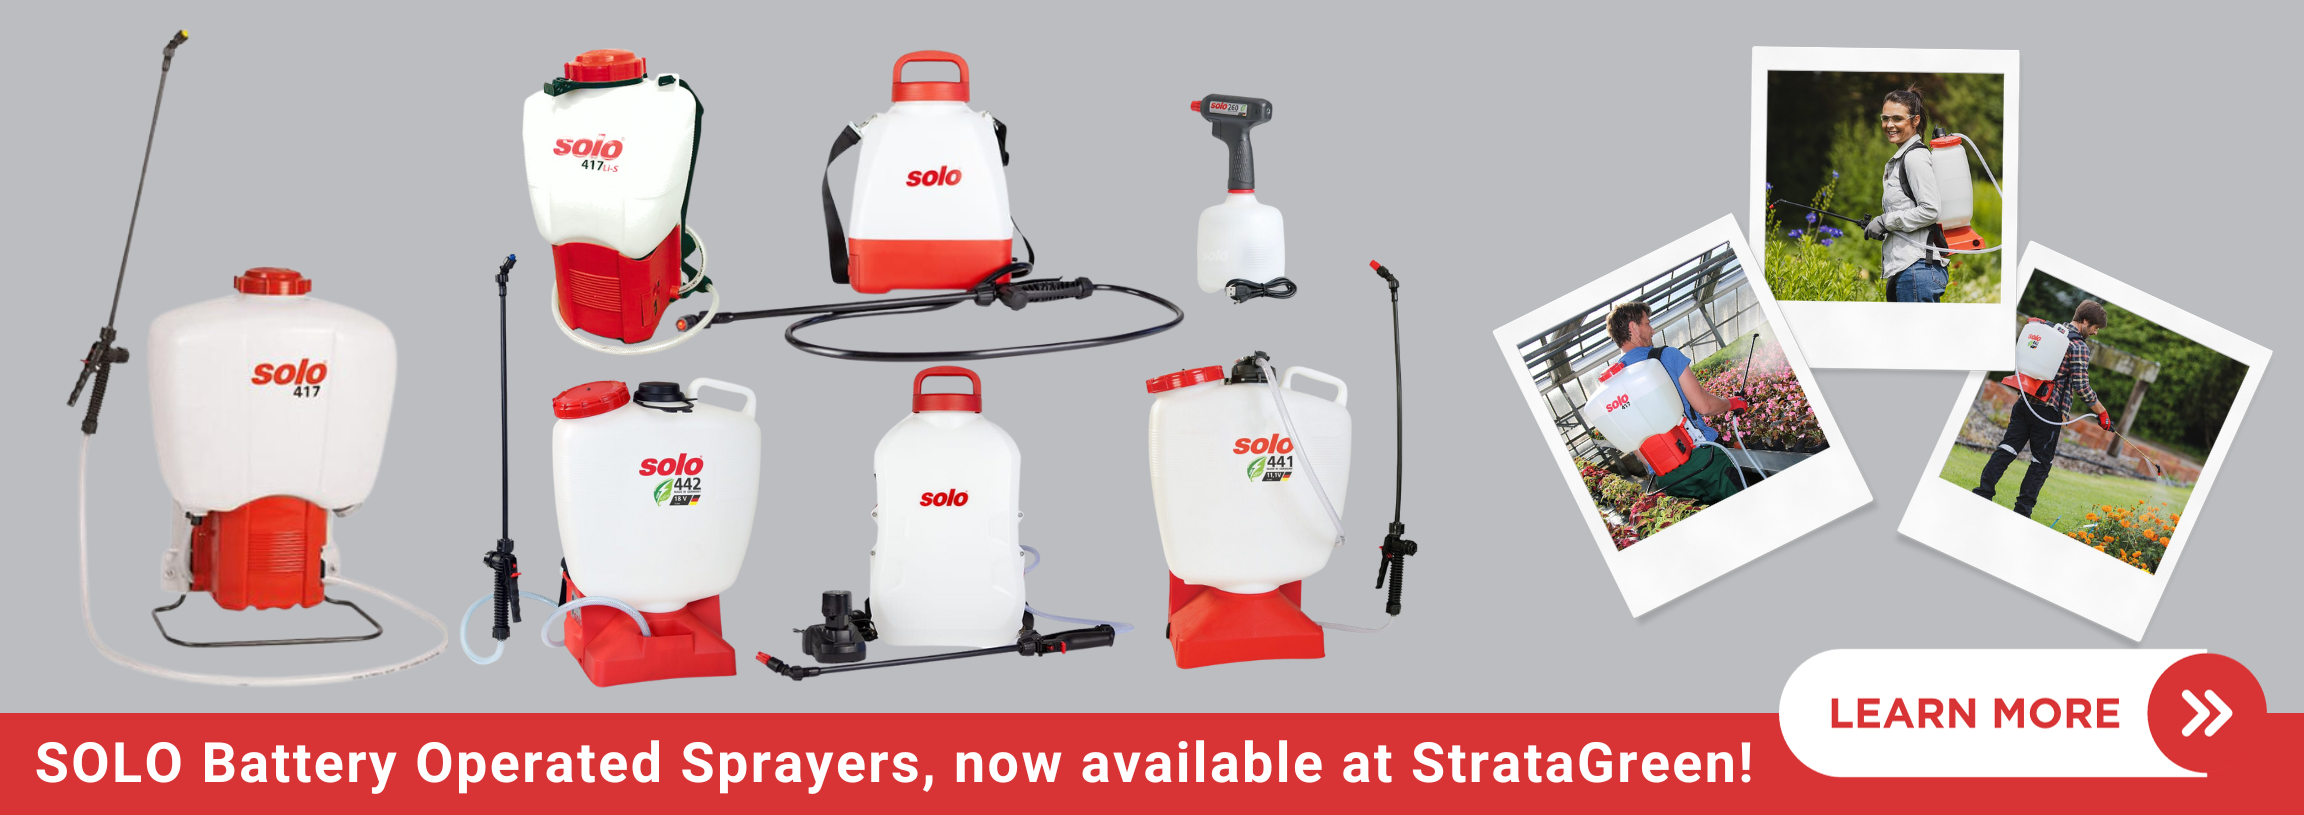 Solo battery operated sprayers StrataGreen